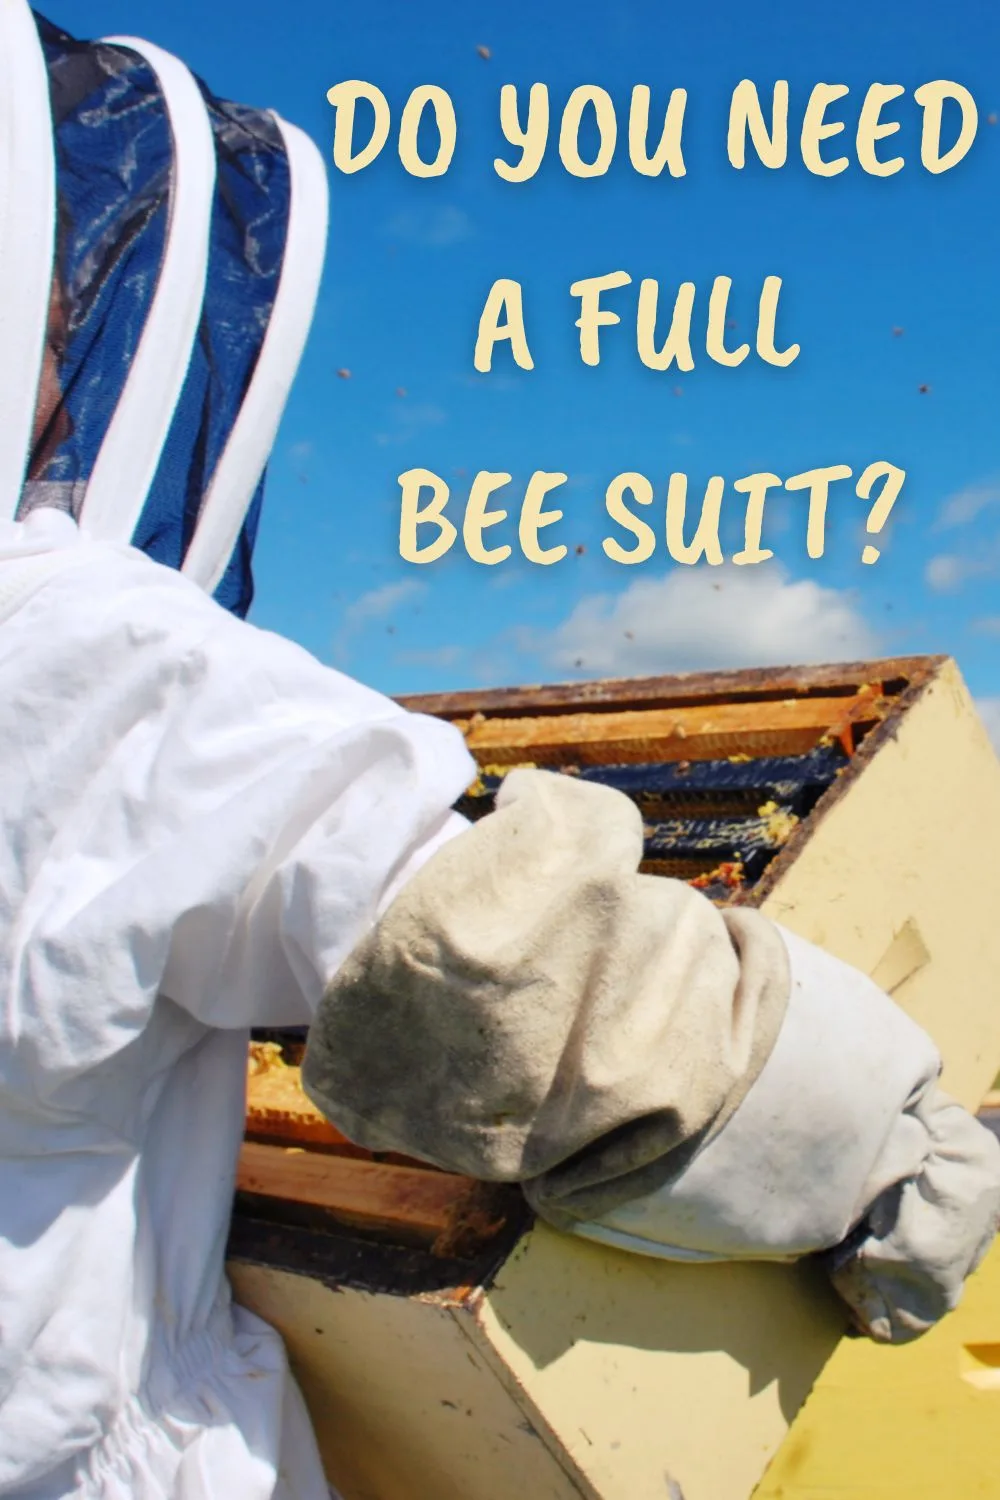 Do you need a full bee suit?